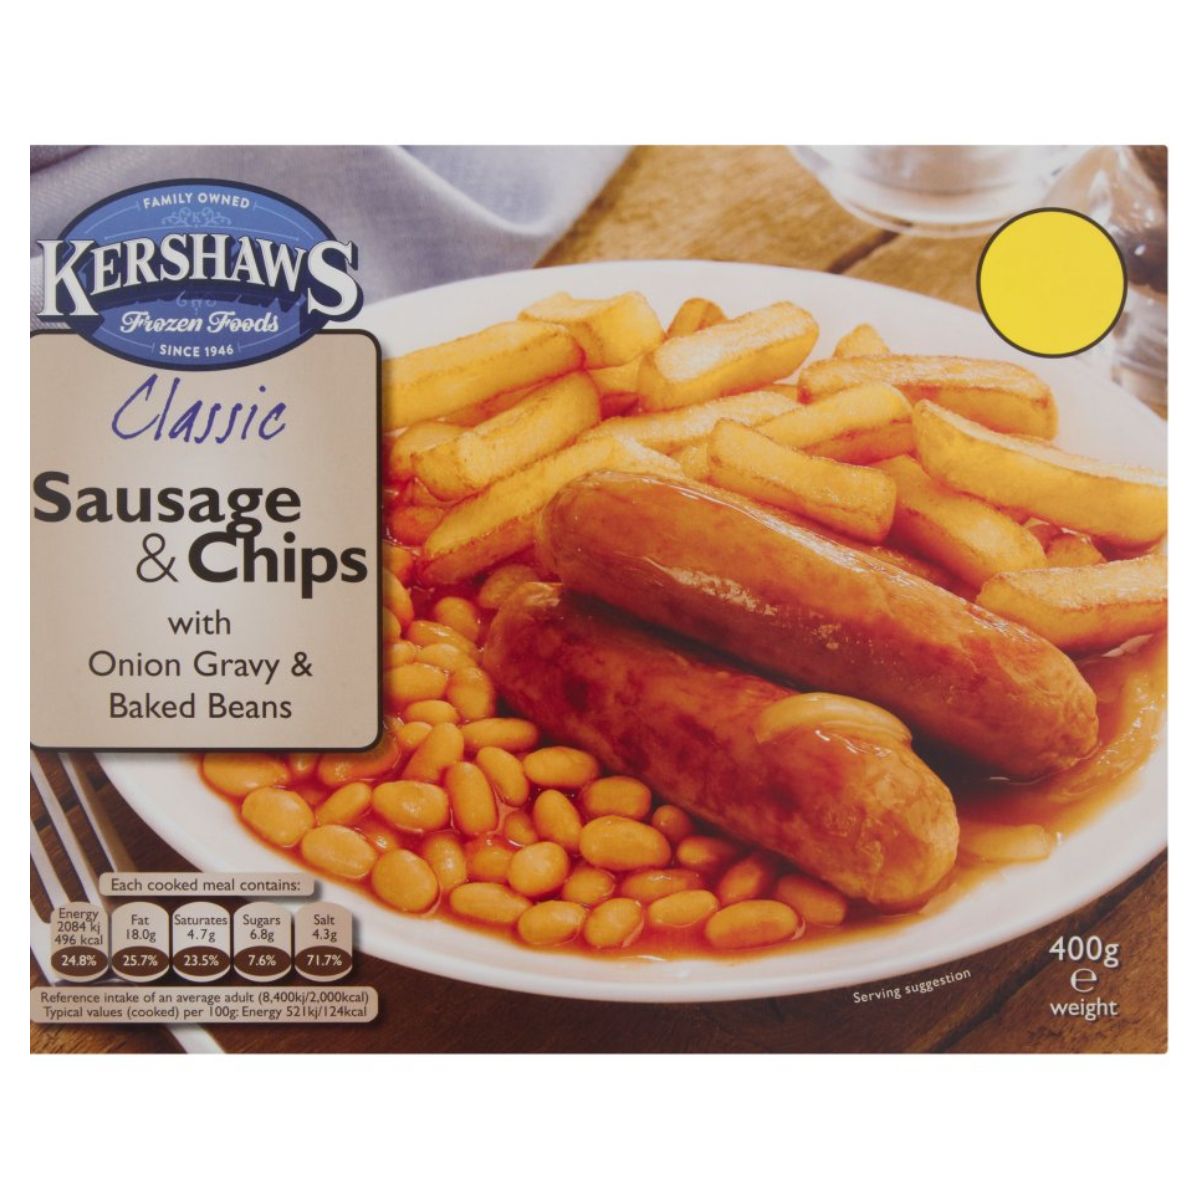 Kershaws - Classic Sausage & Chips with Onion Gravy & Baked Beans - 400g